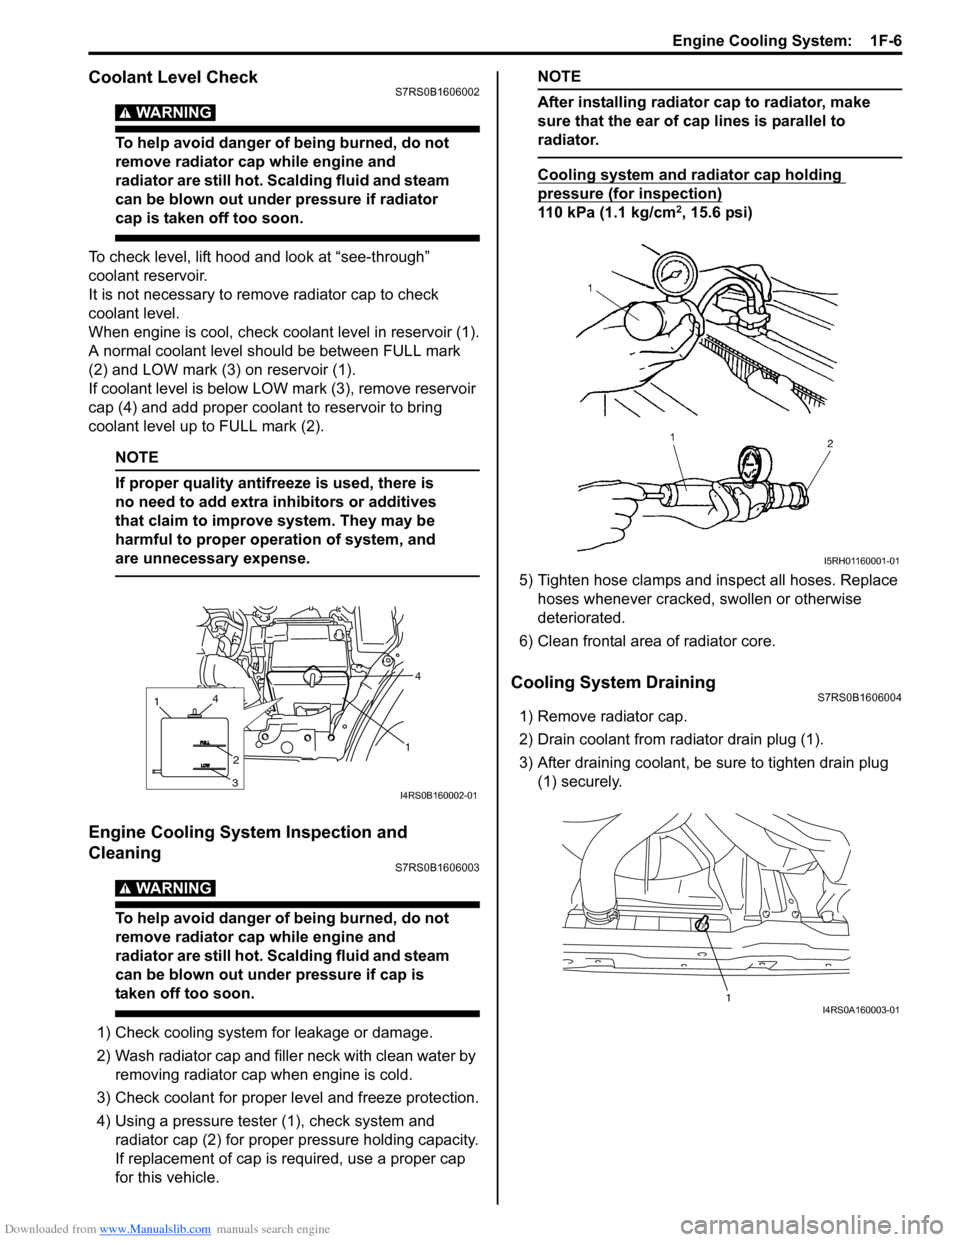 SUZUKI SWIFT 2008 2.G Service Workshop Manual Downloaded from www.Manualslib.com manuals search engine Engine Cooling System:  1F-6
Coolant Level CheckS7RS0B1606002
WARNING! 
To help avoid danger of being burned, do not 
remove radiator cap while